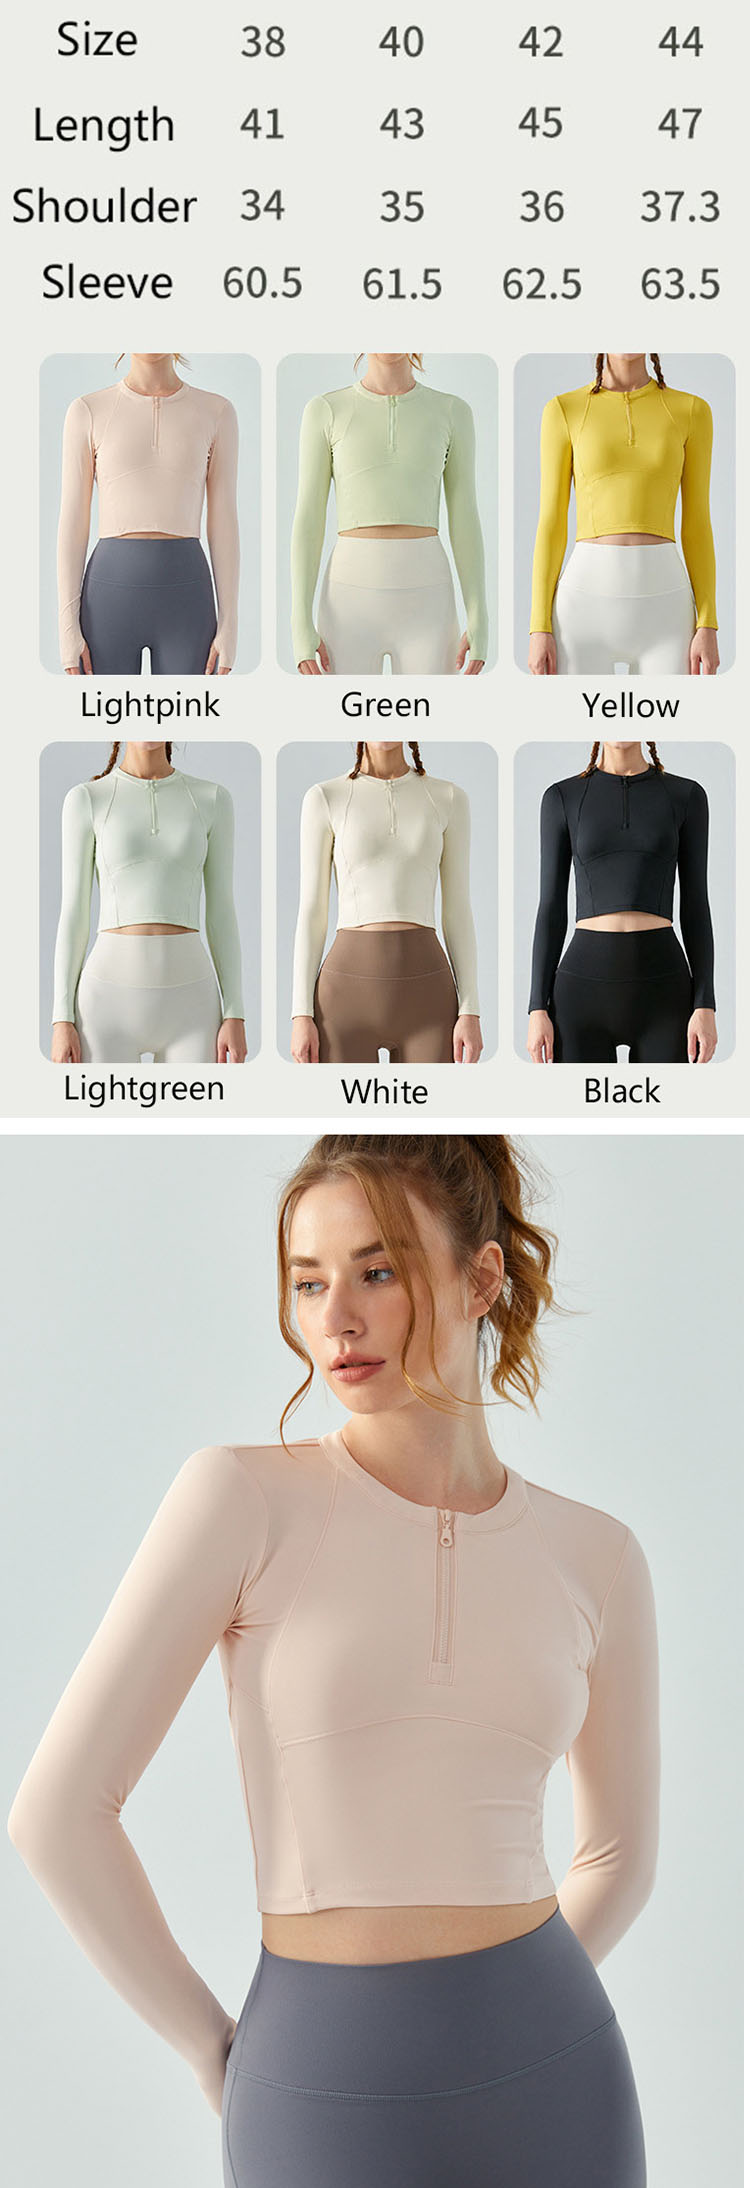 It adopts neckline zipper design, which is convenient to put on and take off and can change the neckline position at any time.